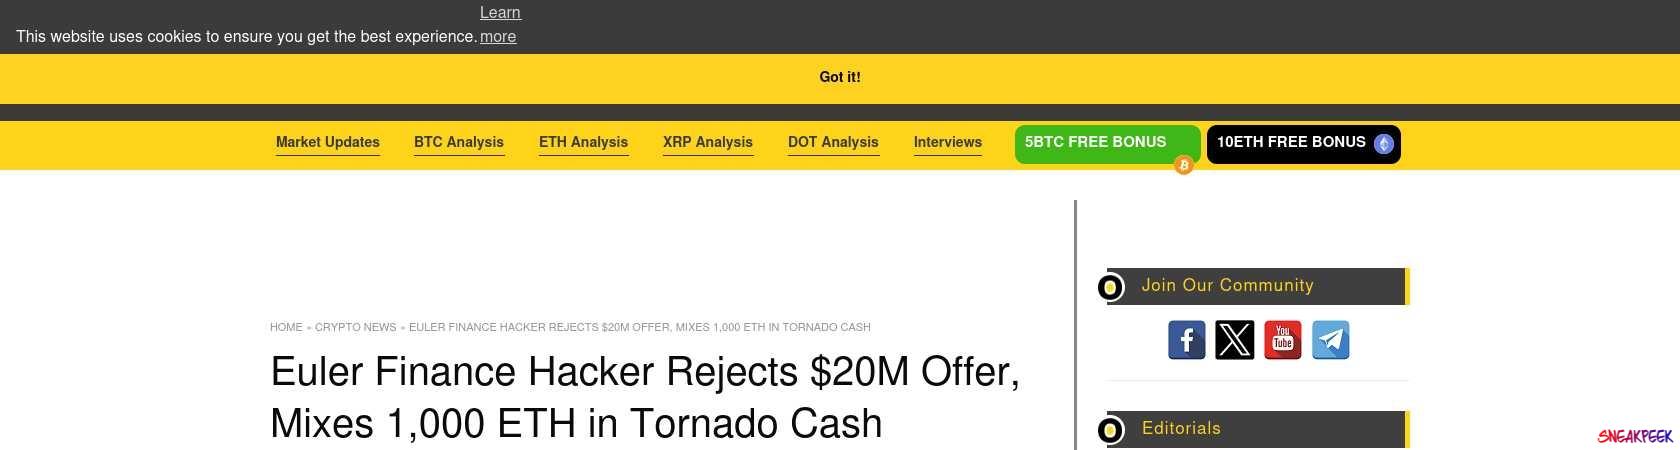 Read the full Article:  ⭲ Euler Finance Hacker Rejects $20M Offer, Mixes 1,000 ETH in Tornado Cash